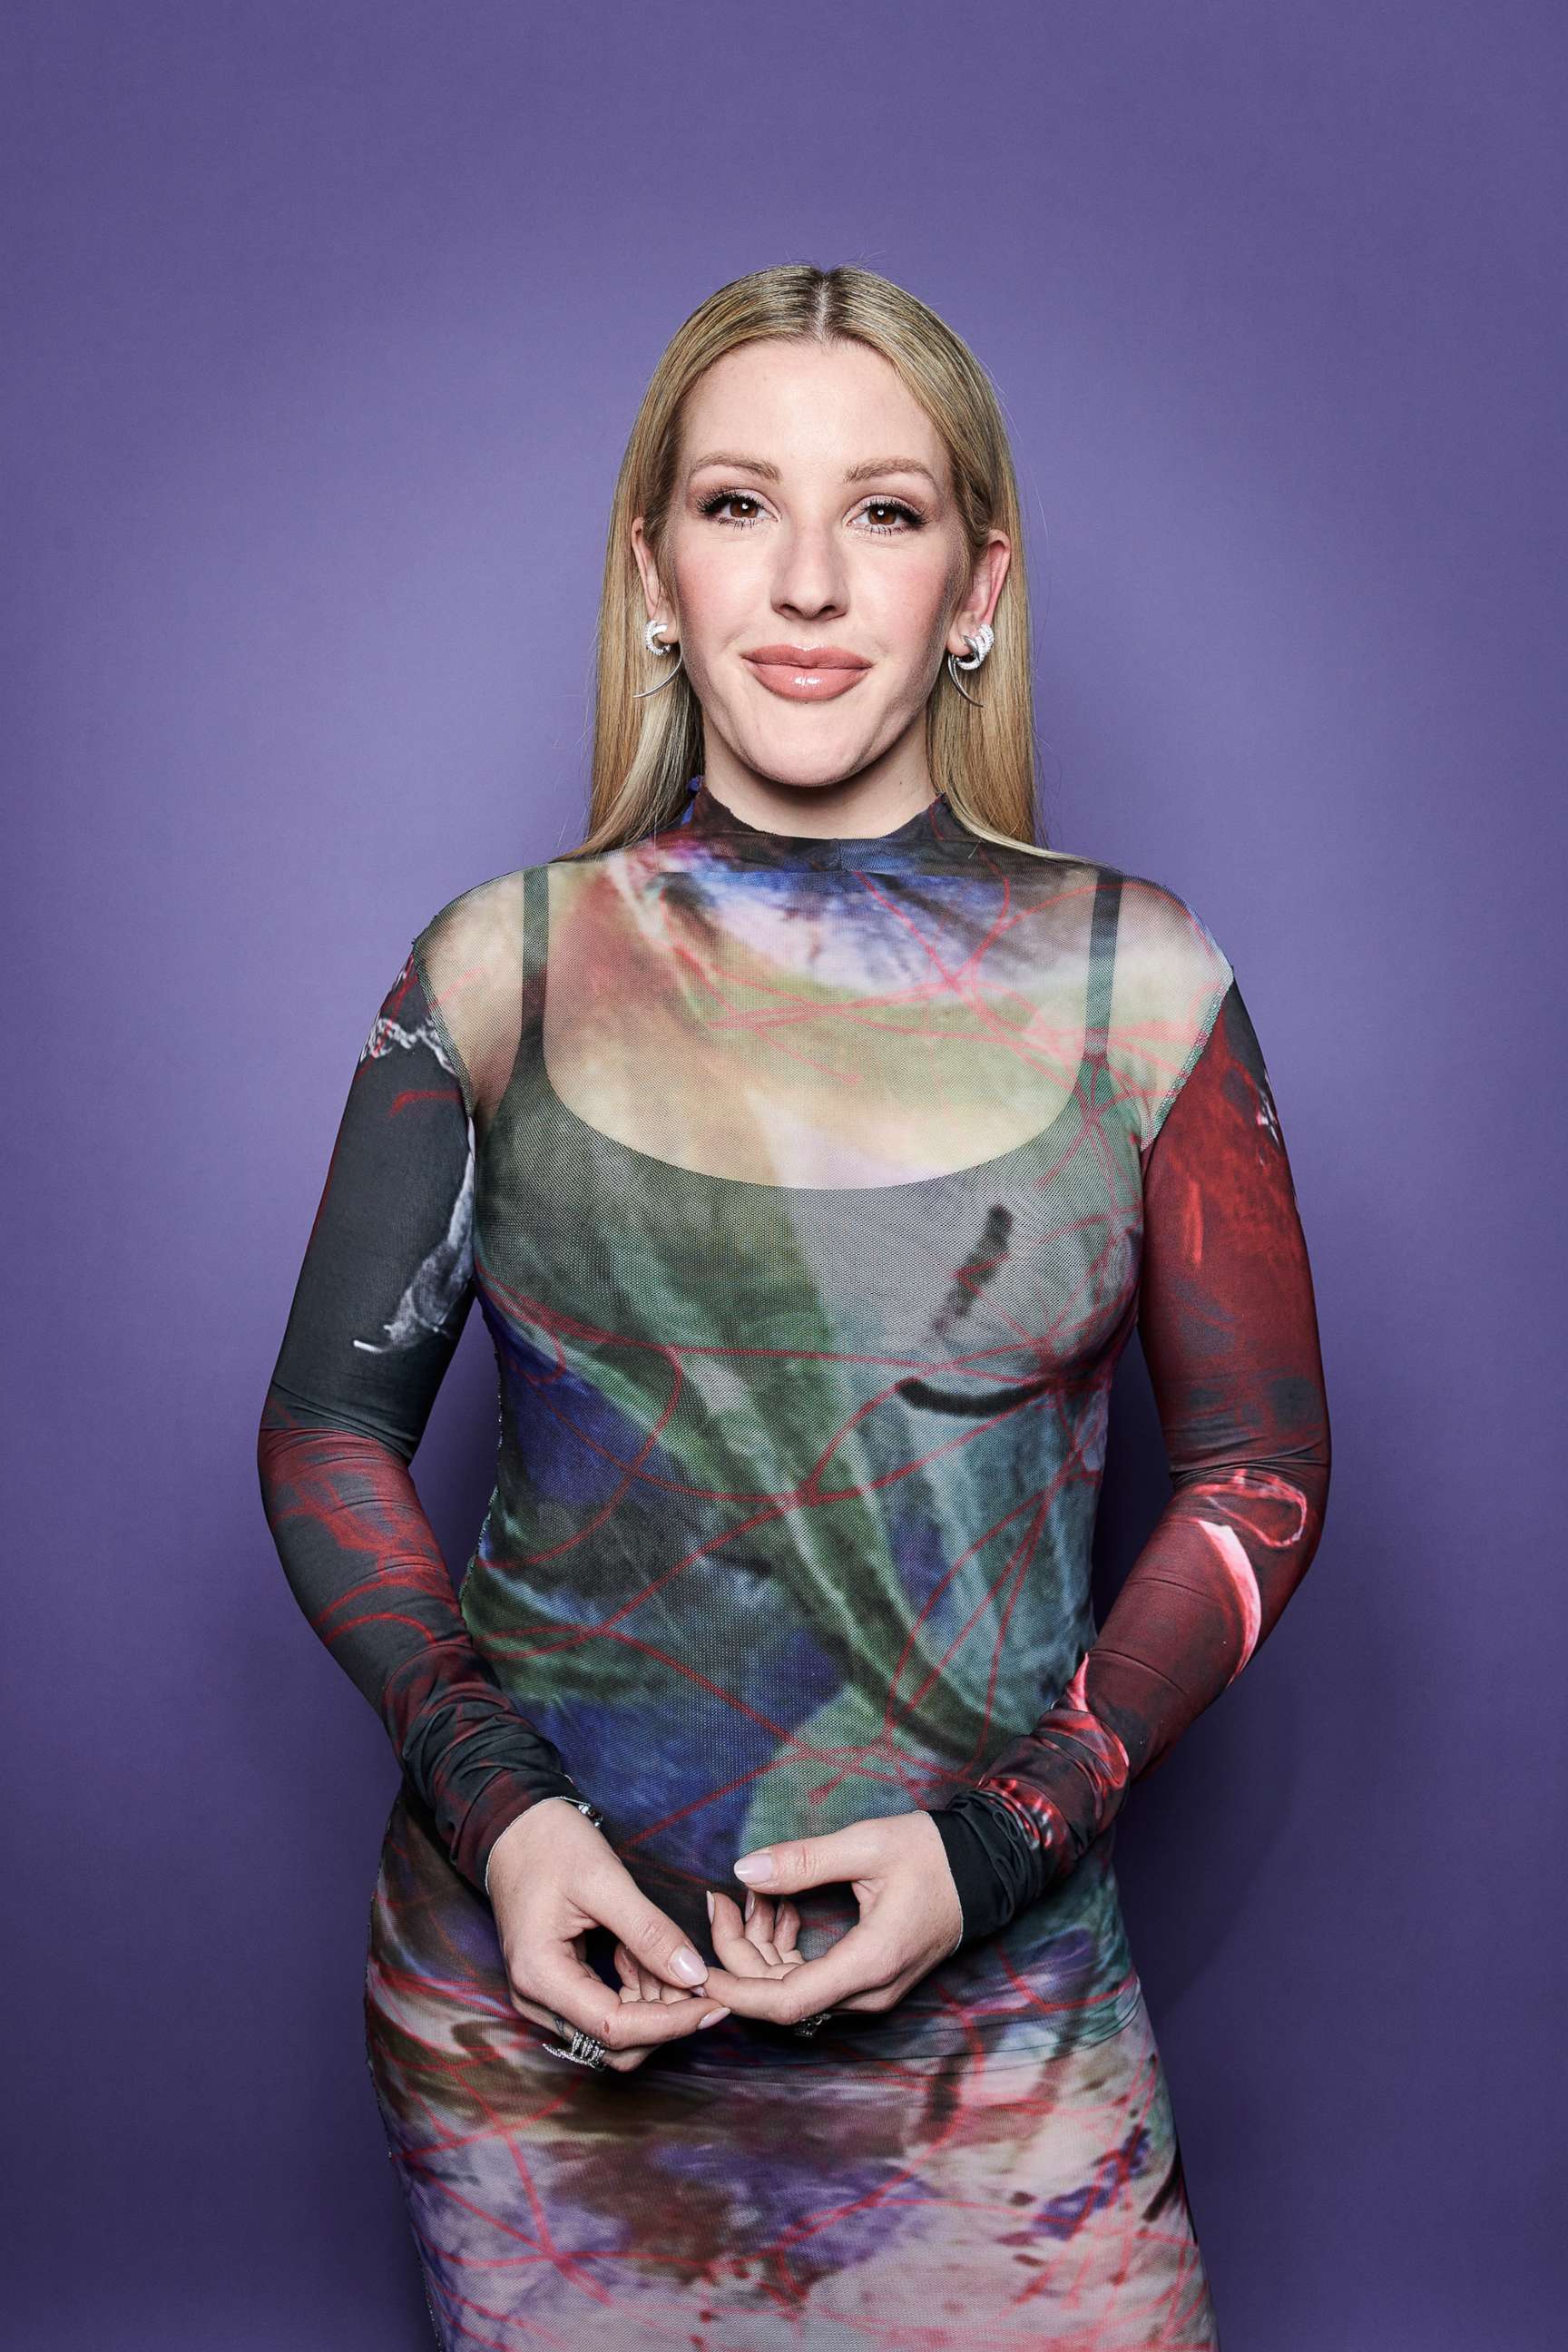 PHOTO: Ellie Goulding attends an event in London, Nov. 19, 2021.